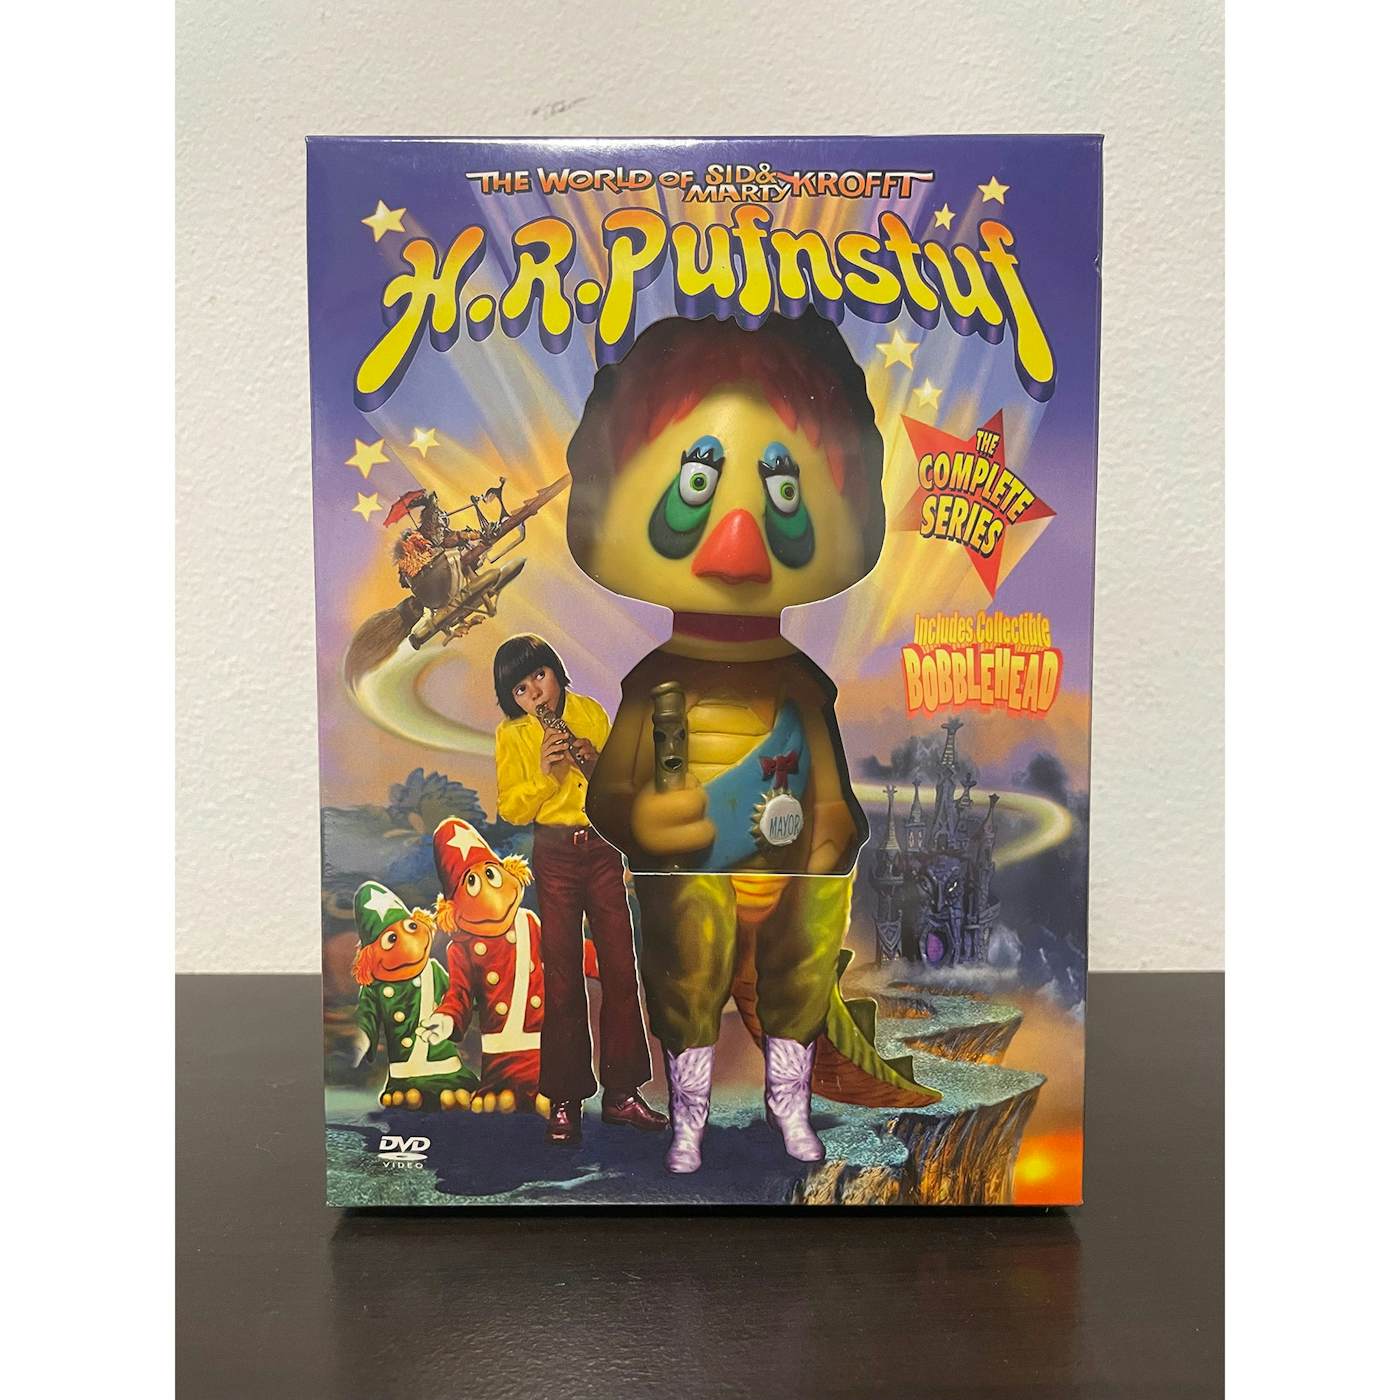 Sid & Marty Krofft Sid and Marty Archives - H.R. Pufnstuf DVD gift set with H.R. Pufnstuf bobblehead